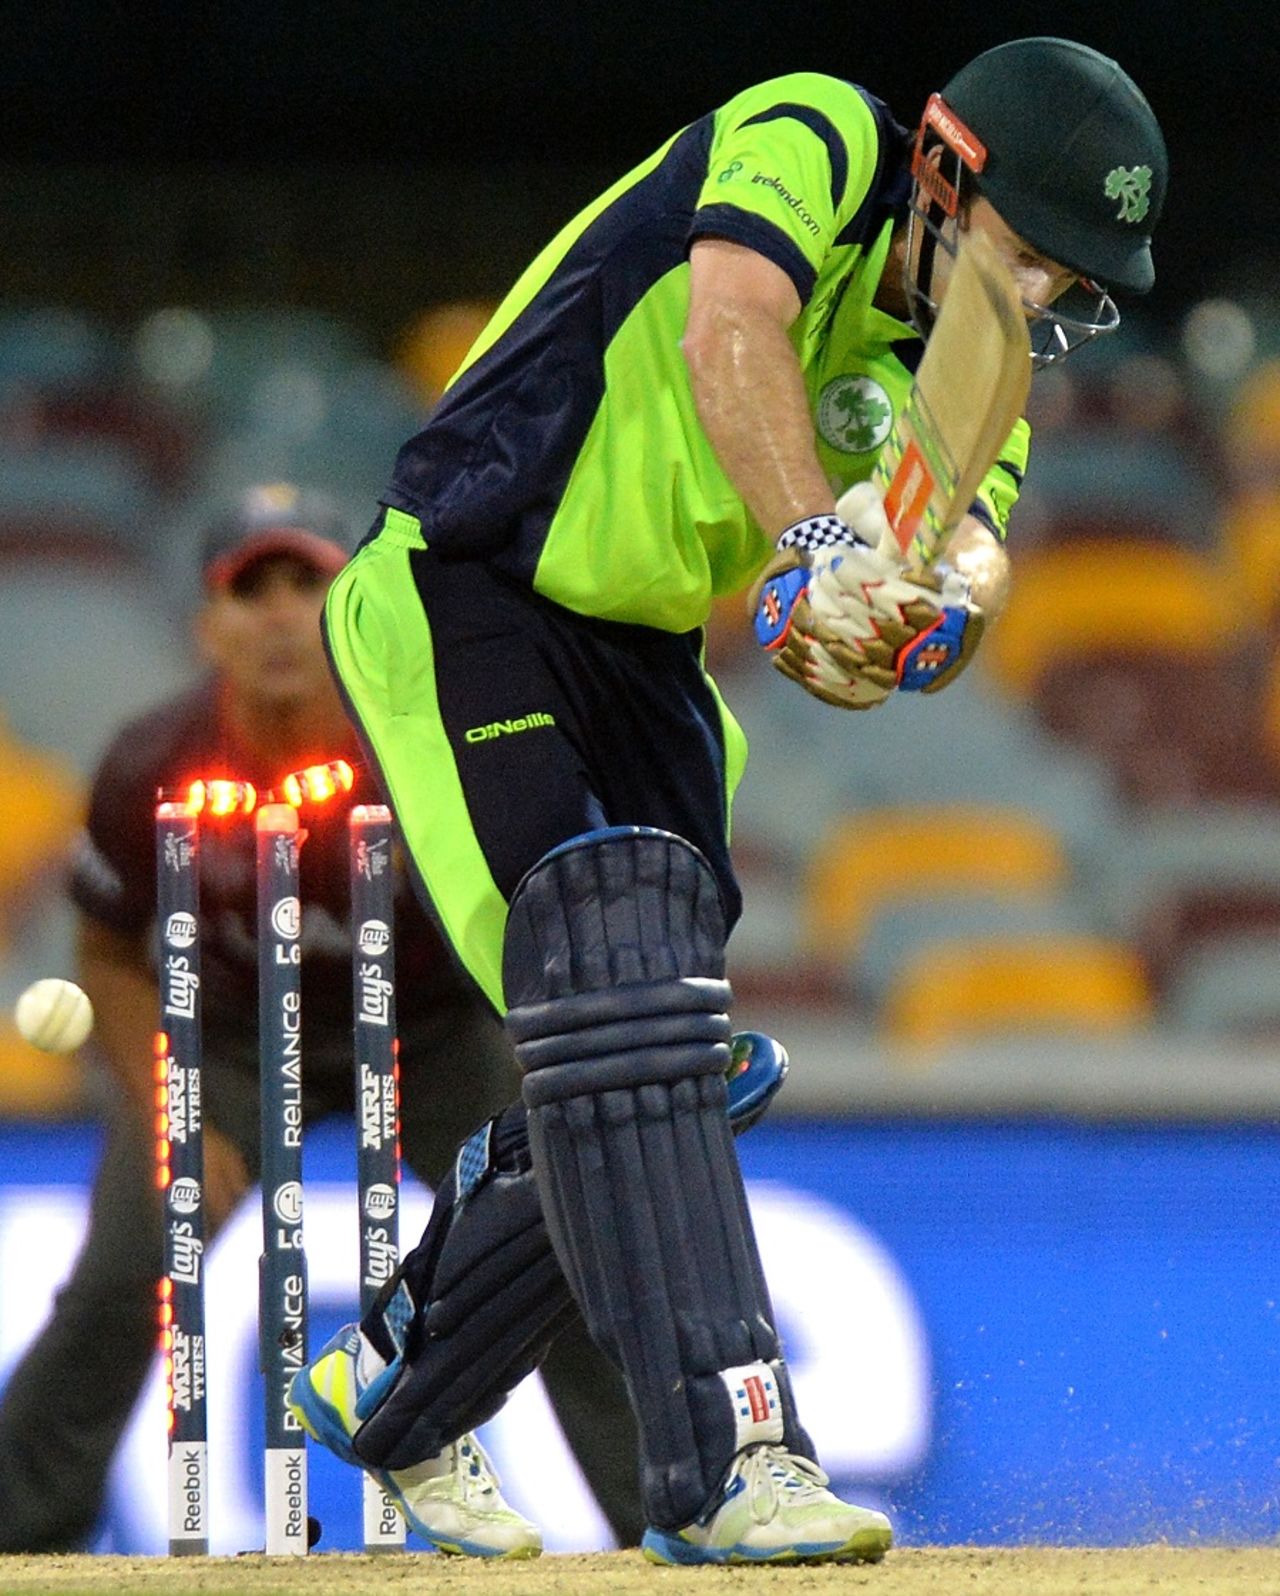 Ed Joyce was bowled but the bails lit up and then fell back into their grooves, Ireland v UAE, World Cup 2015, Group B, Brisbane, February 25, 2015